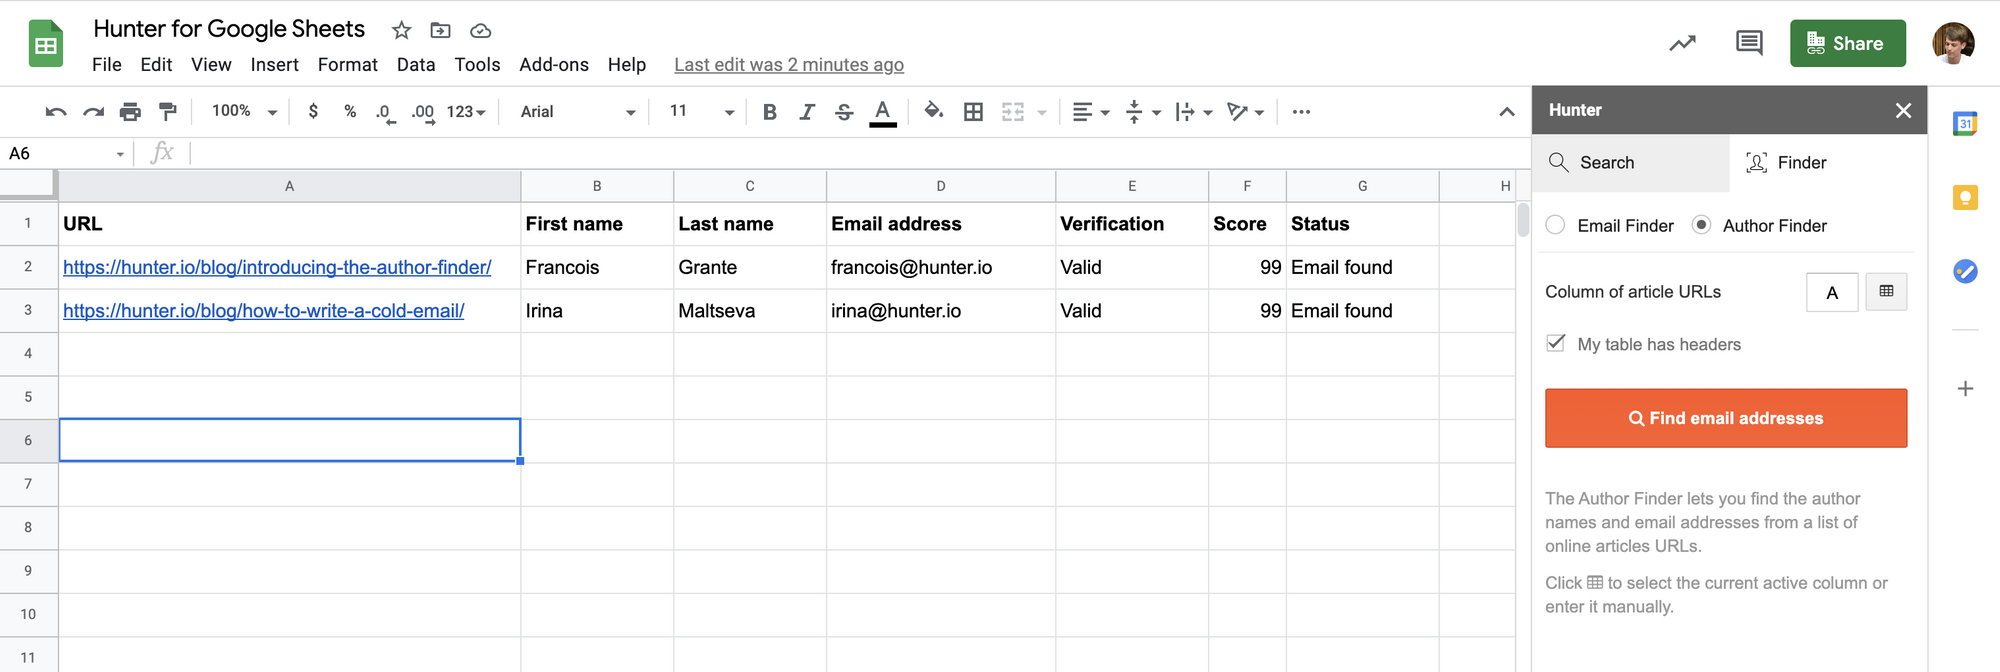 Author Finder in the Google Sheets add-on